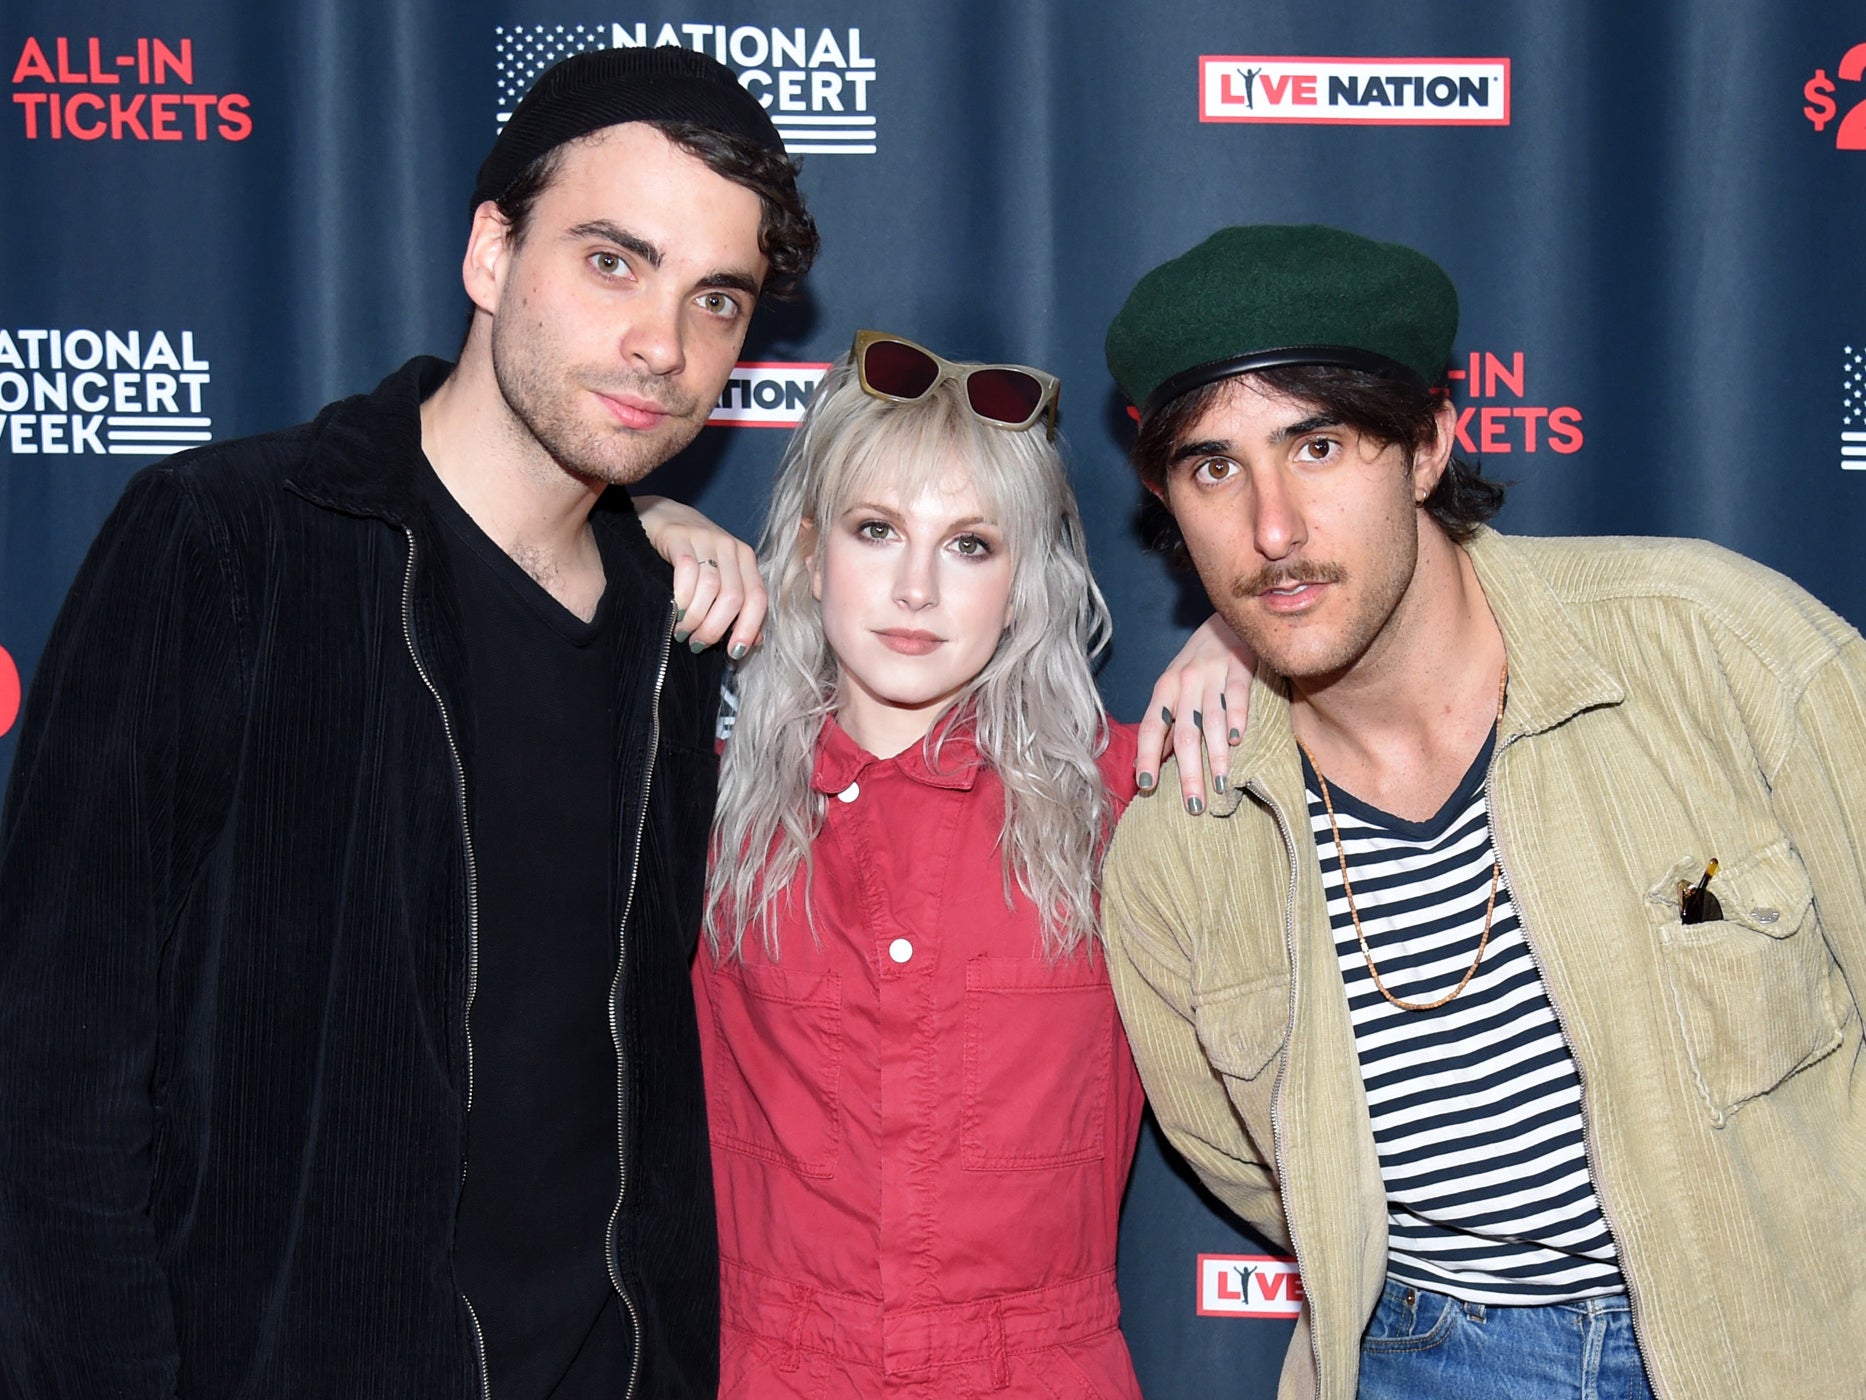 Paramore’s latest album, ‘This is Why’, was released to strong reviews earlier this year